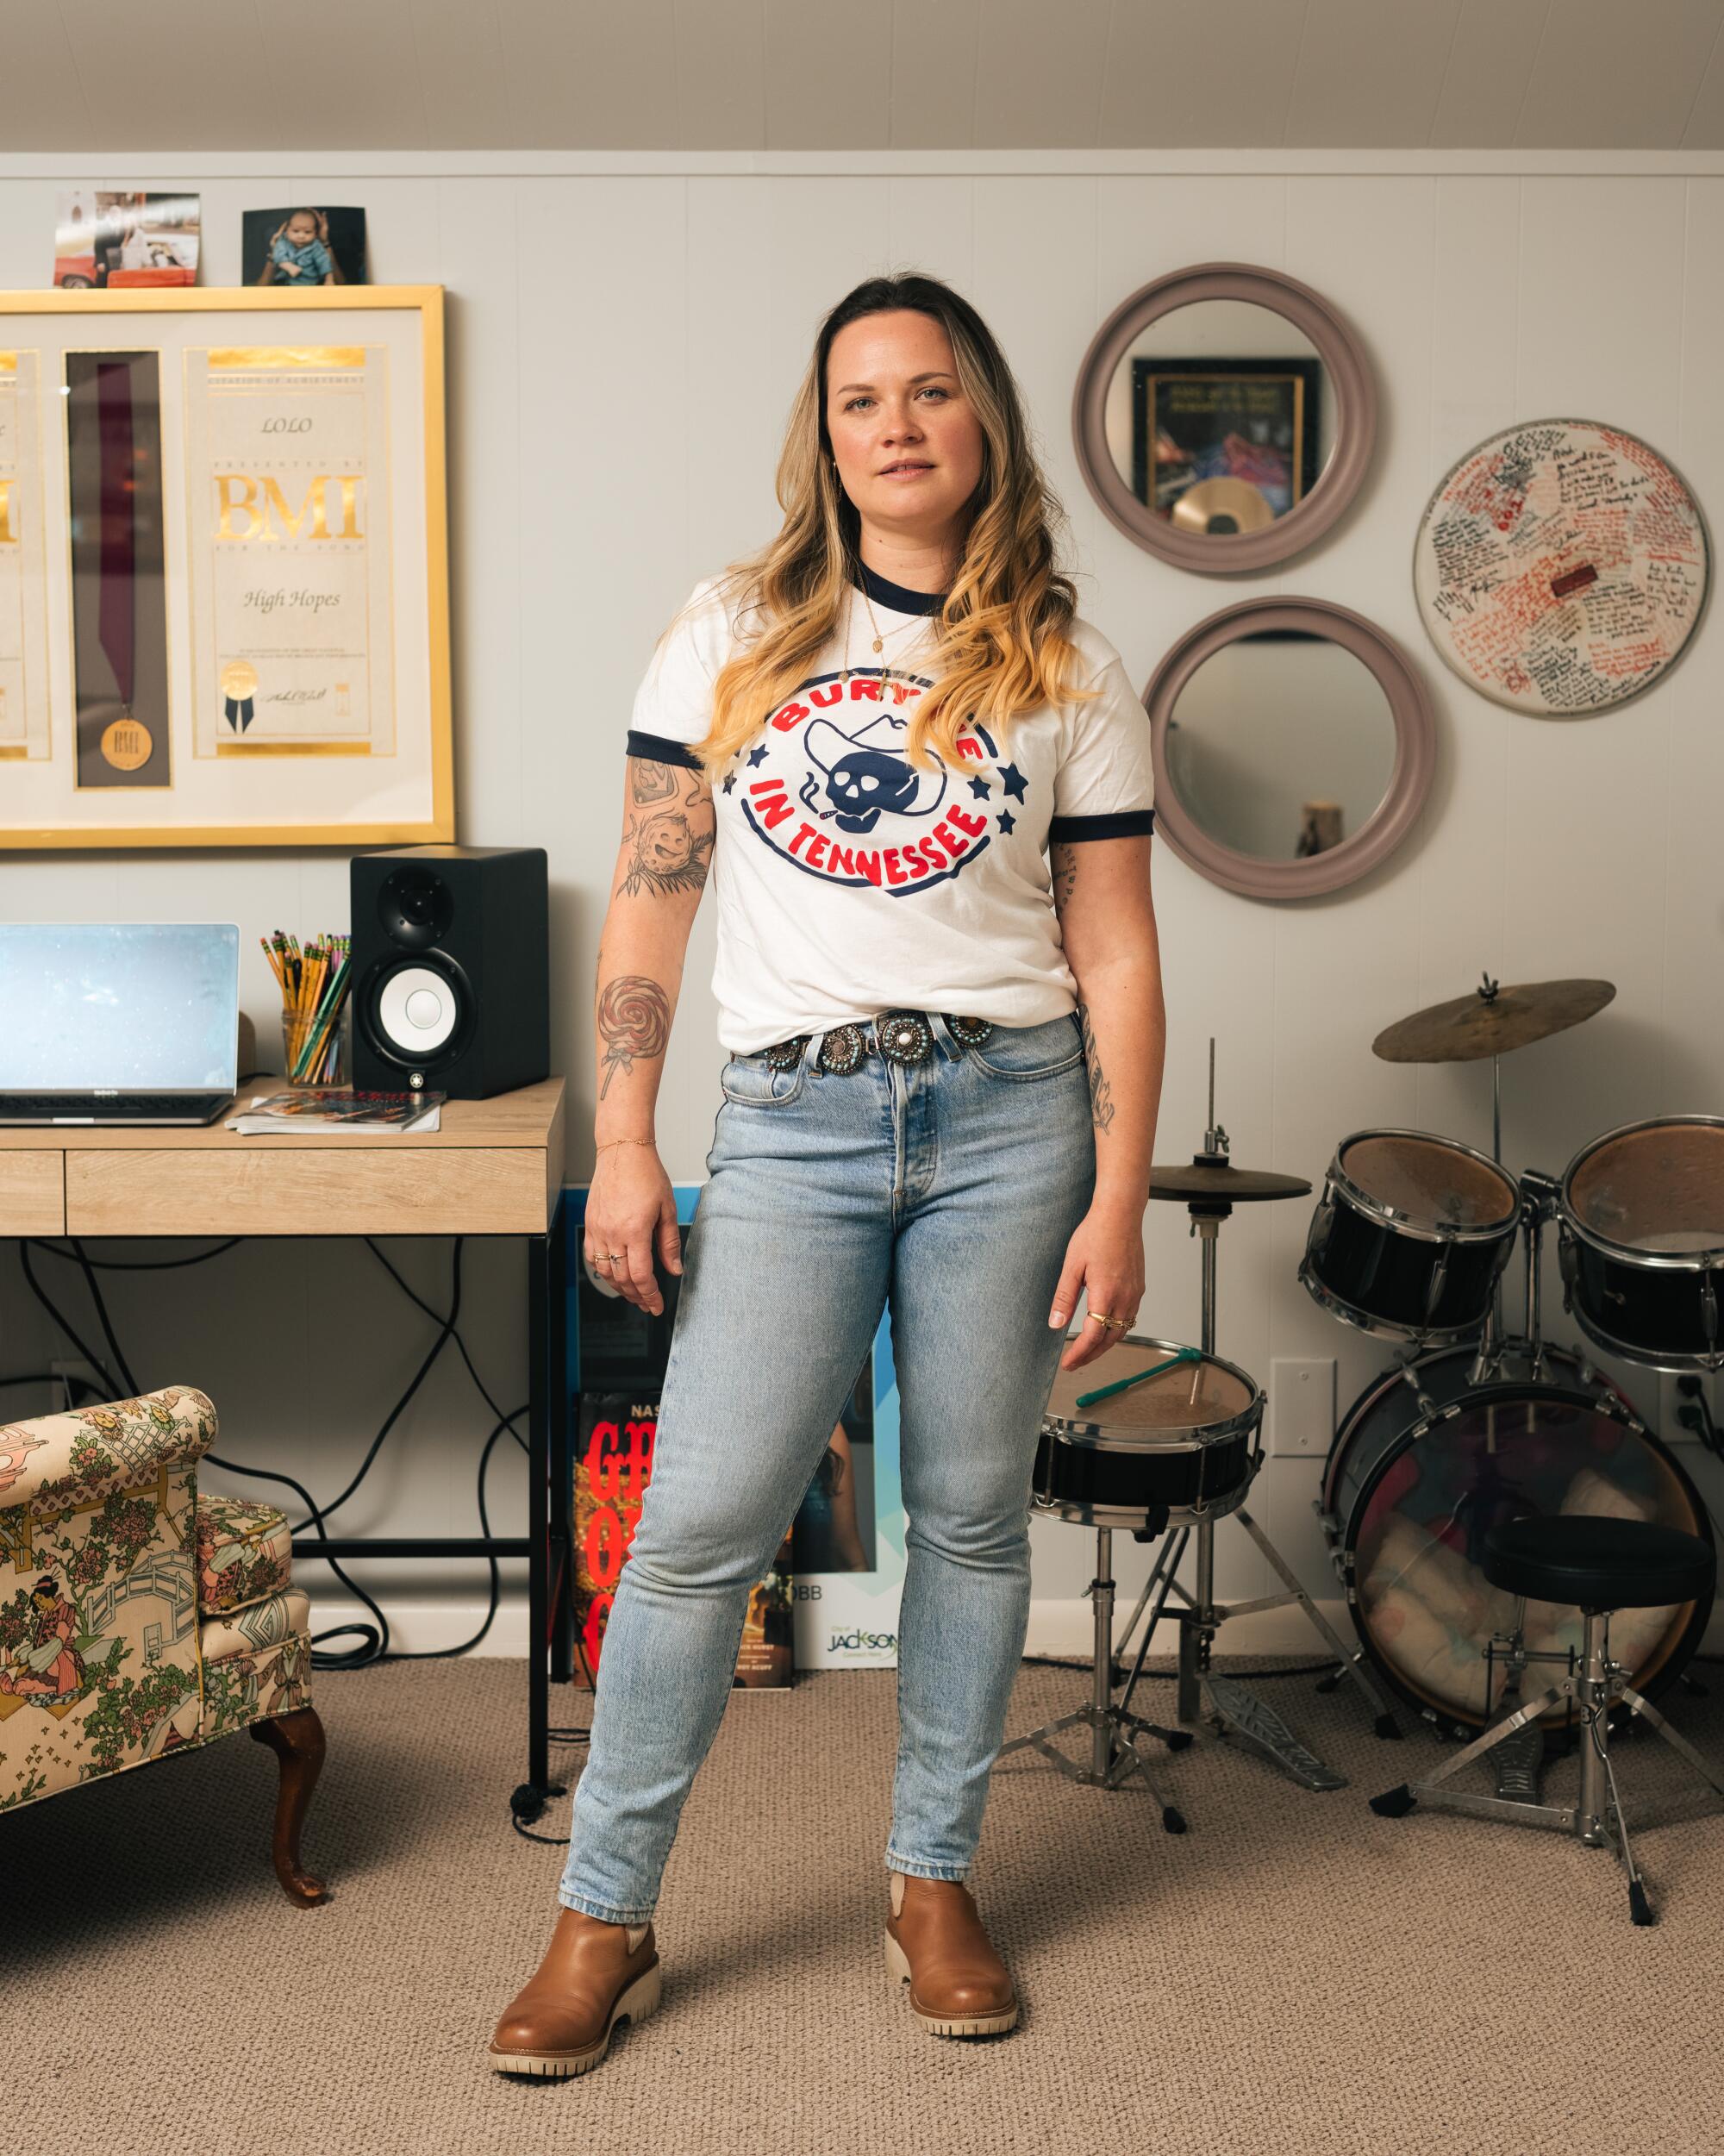 A woman wearing a "Bury Me in Tennessee" shirt stands in front of a set of drums.